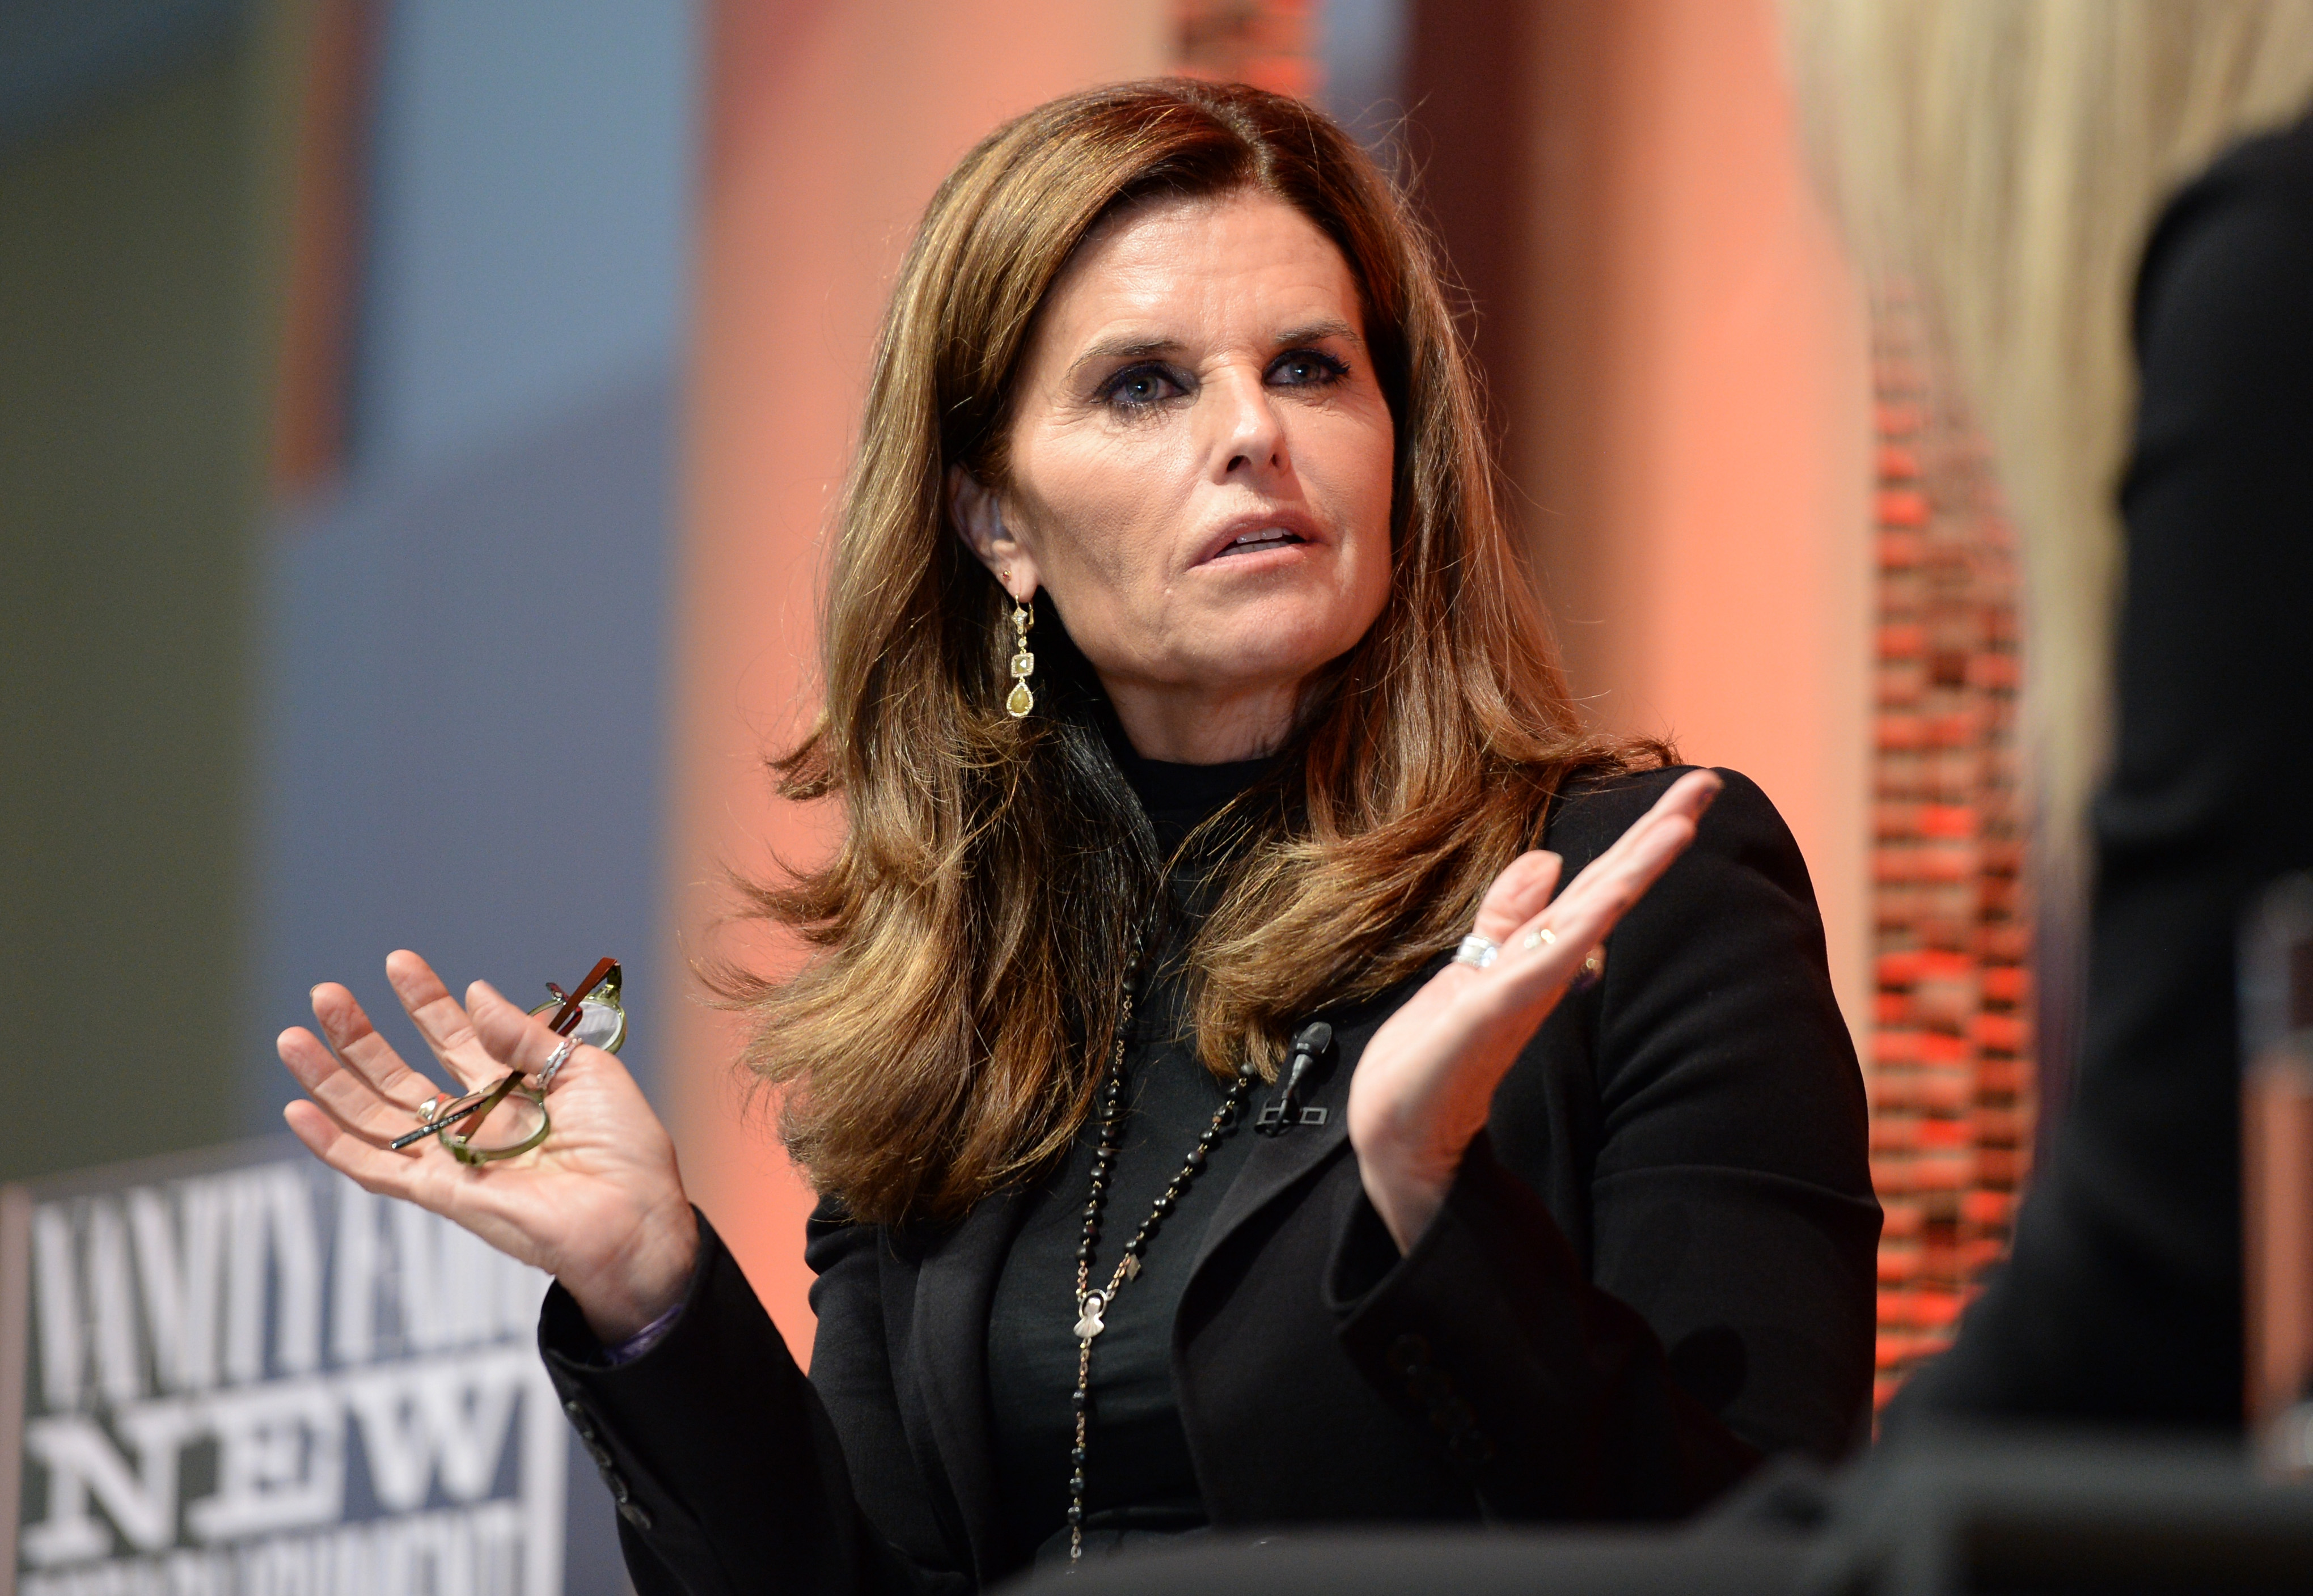 NBC News Special Anchor Maria Shriver speaks onstage during "True BloodDiagnostics in the New Age" at the Vanity Fair New Establishment Summit at Yerba Buena Center for the Arts on October 6, 2015 in San Francisco, California. (Michael Kovac—Getty Images / Vanity Fair)